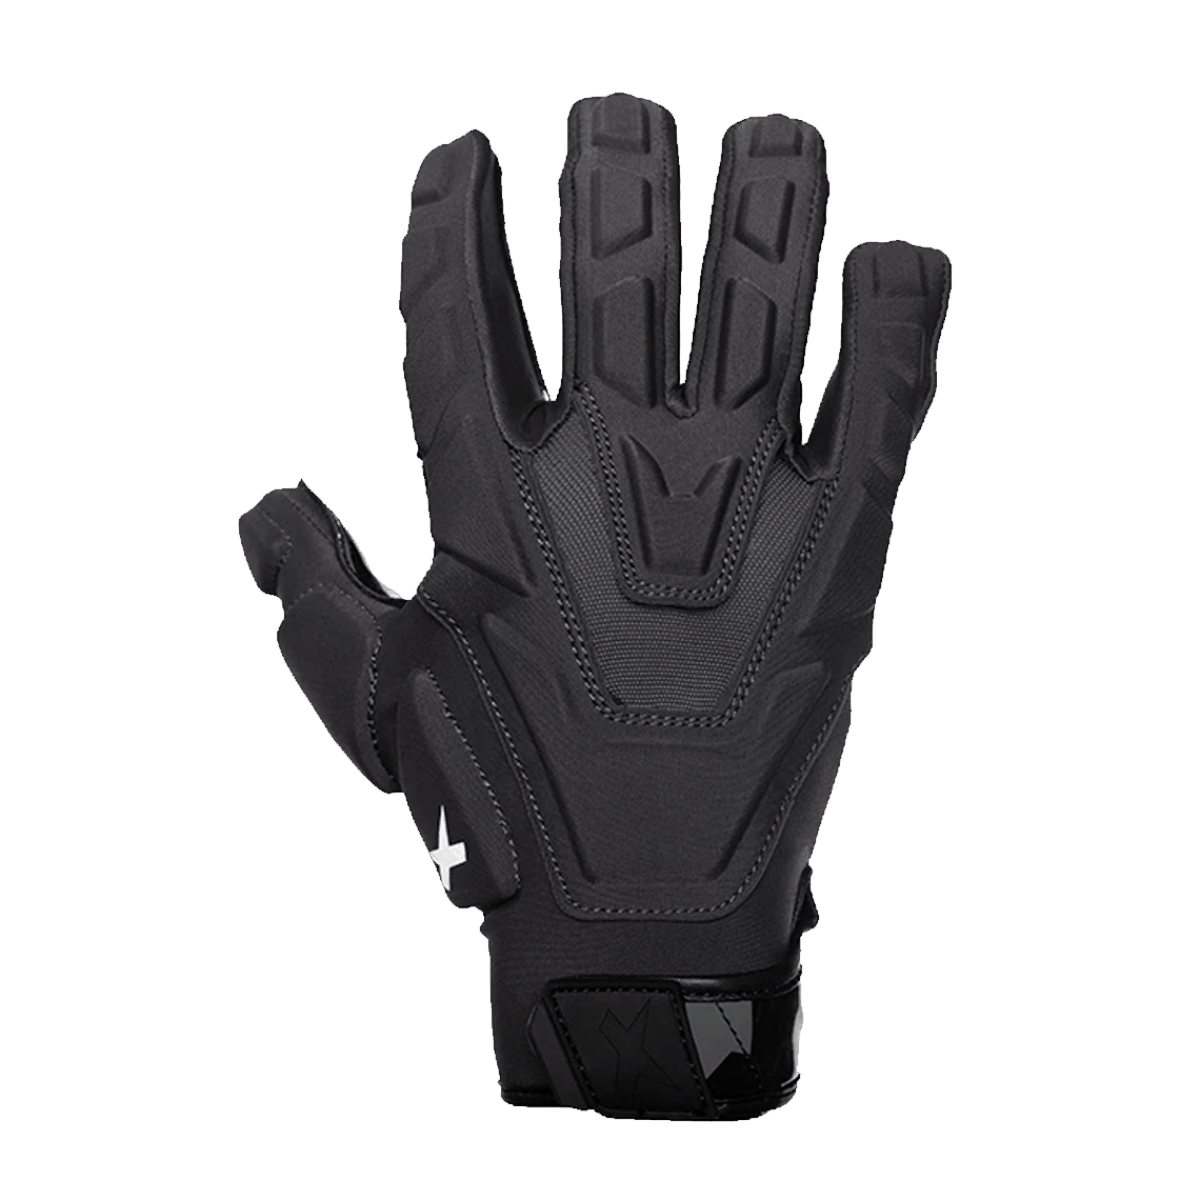 Palm view of black and gray X-Camo print on Xenith Padded Football Gloves.